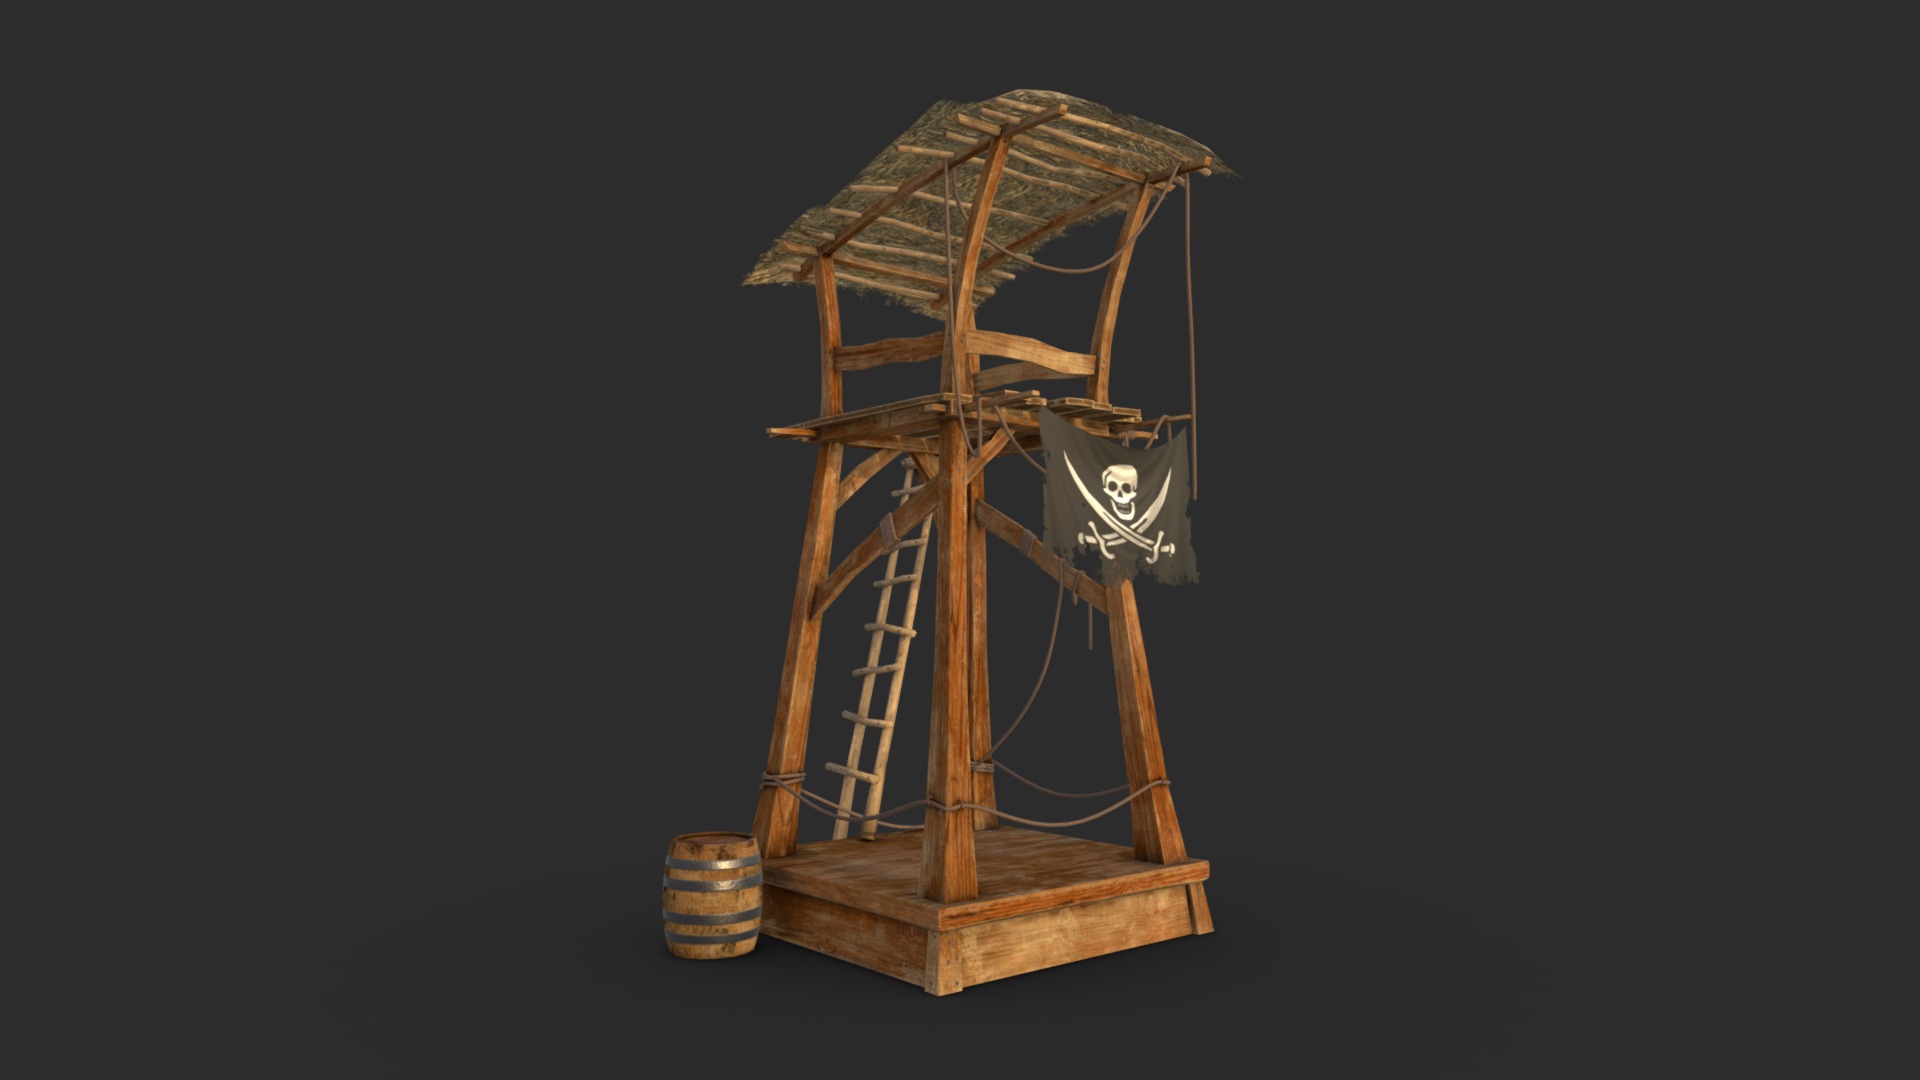 A wooden wach tower ready for game and including a pirate flag 3d model